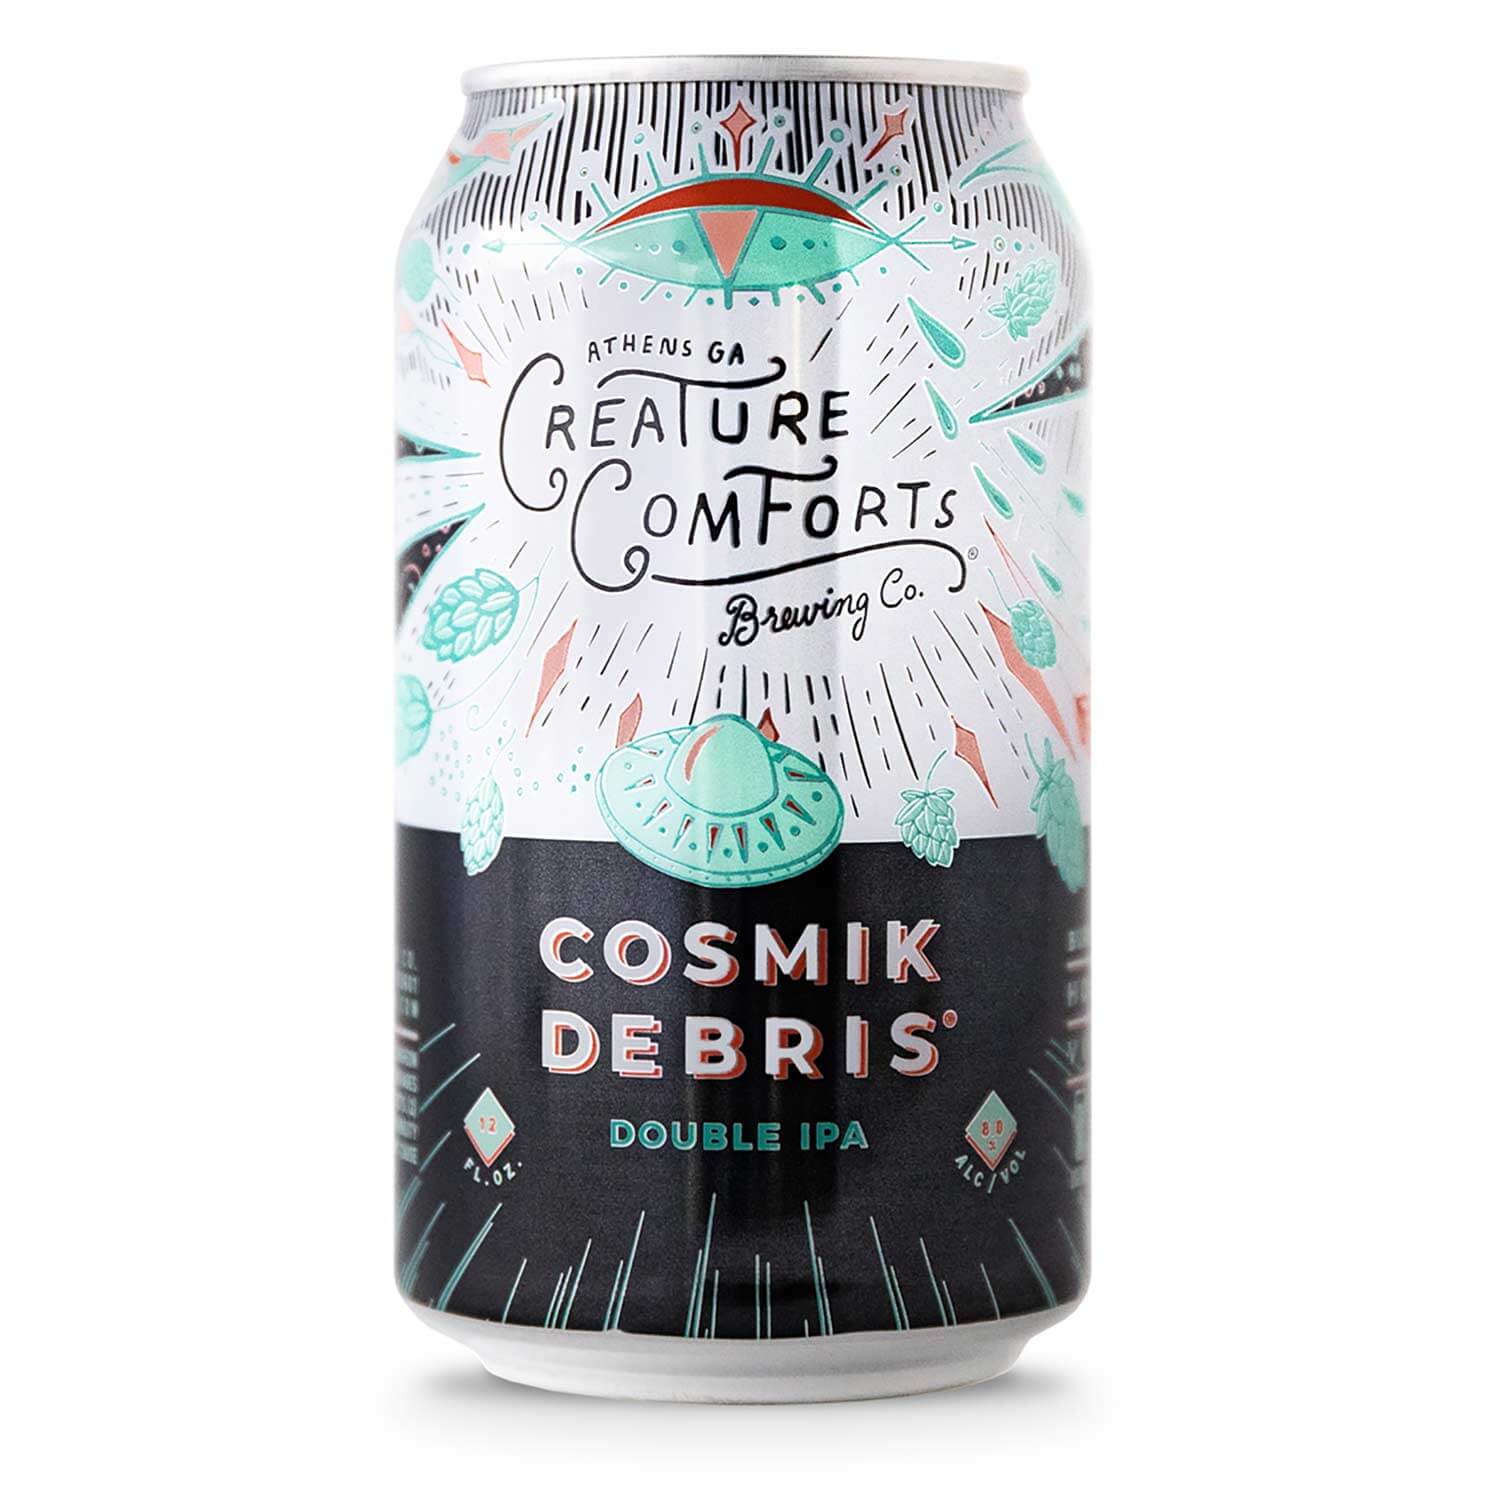 Creature Comforts Brewing Co's {"id":143,"brewery_id":31,"name":"Cosmik Debris","image":"cosmik-debris.jpeg","slug":"creature-comforts-brewing-co\/cosmik-debris","calories":null,"abv":"8.0","ibu":null,"type":"Ale","style":"Double IPA","description":"Cosmik Debris is a Double IPA featuring Simcoe, Strata, Mosaic, Cascade, and Chinook hops. Intensely hopped, this Double IPA presents a bursting aroma of citrus zest, melon, and subtle pine. The big, fruity aroma, firm bitterness, and lighter malt character paves the way to a soft and balanced flavor profile.","available":"All Year","created_at":null,"updated_at":null,"brewery":{"id":31,"user_id":null,"name":"Creature Comforts Brewing Co","slug":null,"logo":null,"description":"Every company should have a plan to support the city they love. For us, this plan takes the form of our three community initiatives. Get Comfortable is designed to address our city\u2019s most pressing needs; Get Artistic works to empower local artists; Brew For One is a chance to do for one what we wish we could do for everyone.","website":"https:\/\/creaturecomfortsbeer.com\/","address":"271 W. Hancock Ave.<br>Athens, GA 30601","facebook_url":null,"twitter_url":null,"instagram_url":null,"created_at":null,"updated_at":null}}